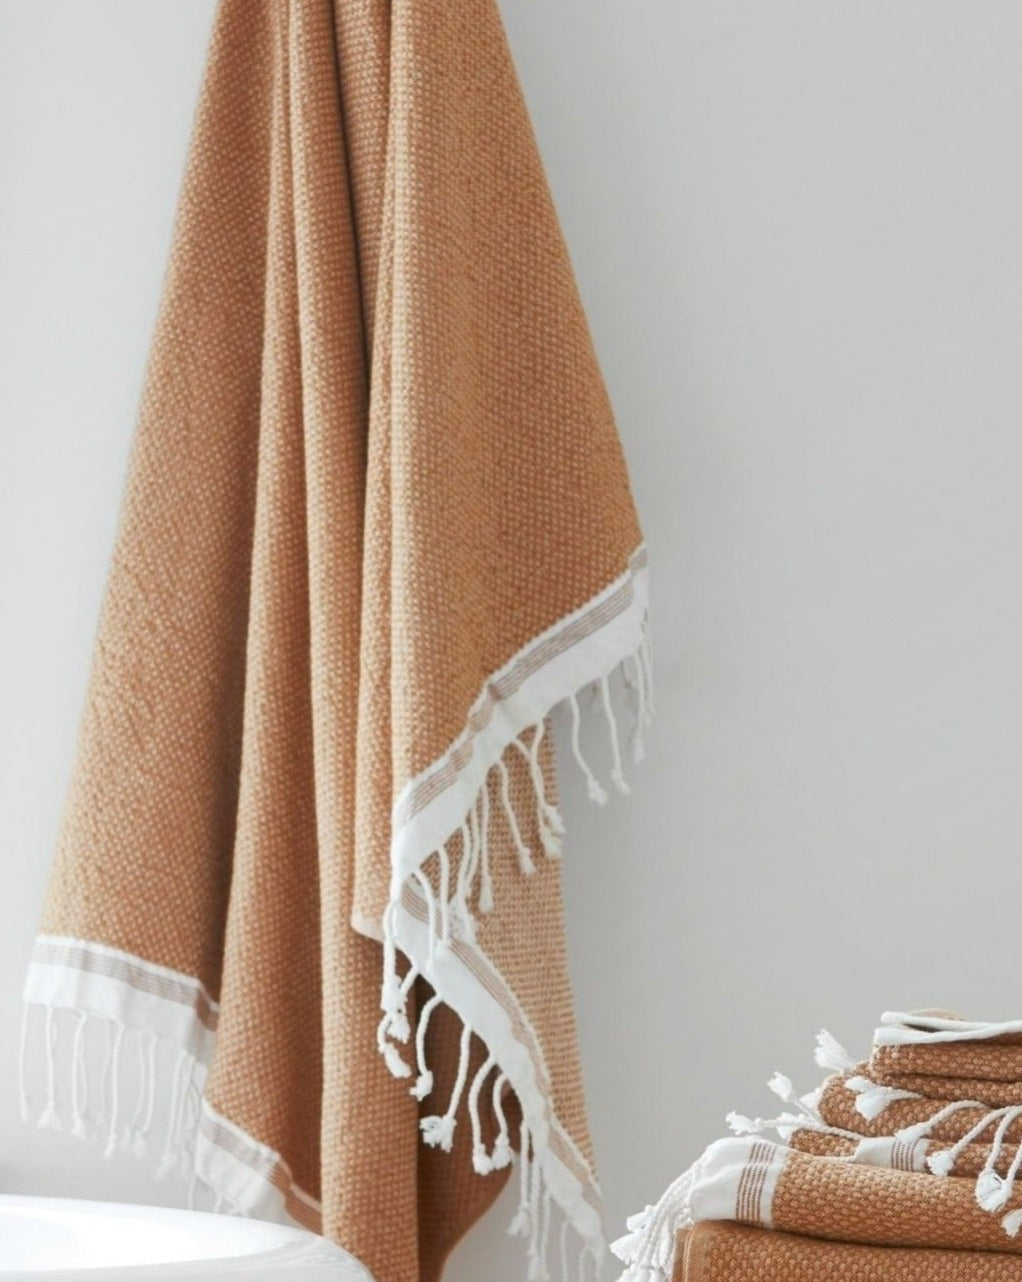 Mediterranean Organic Cotton Towels by Coyuchi - Available in Canada at Resthouse